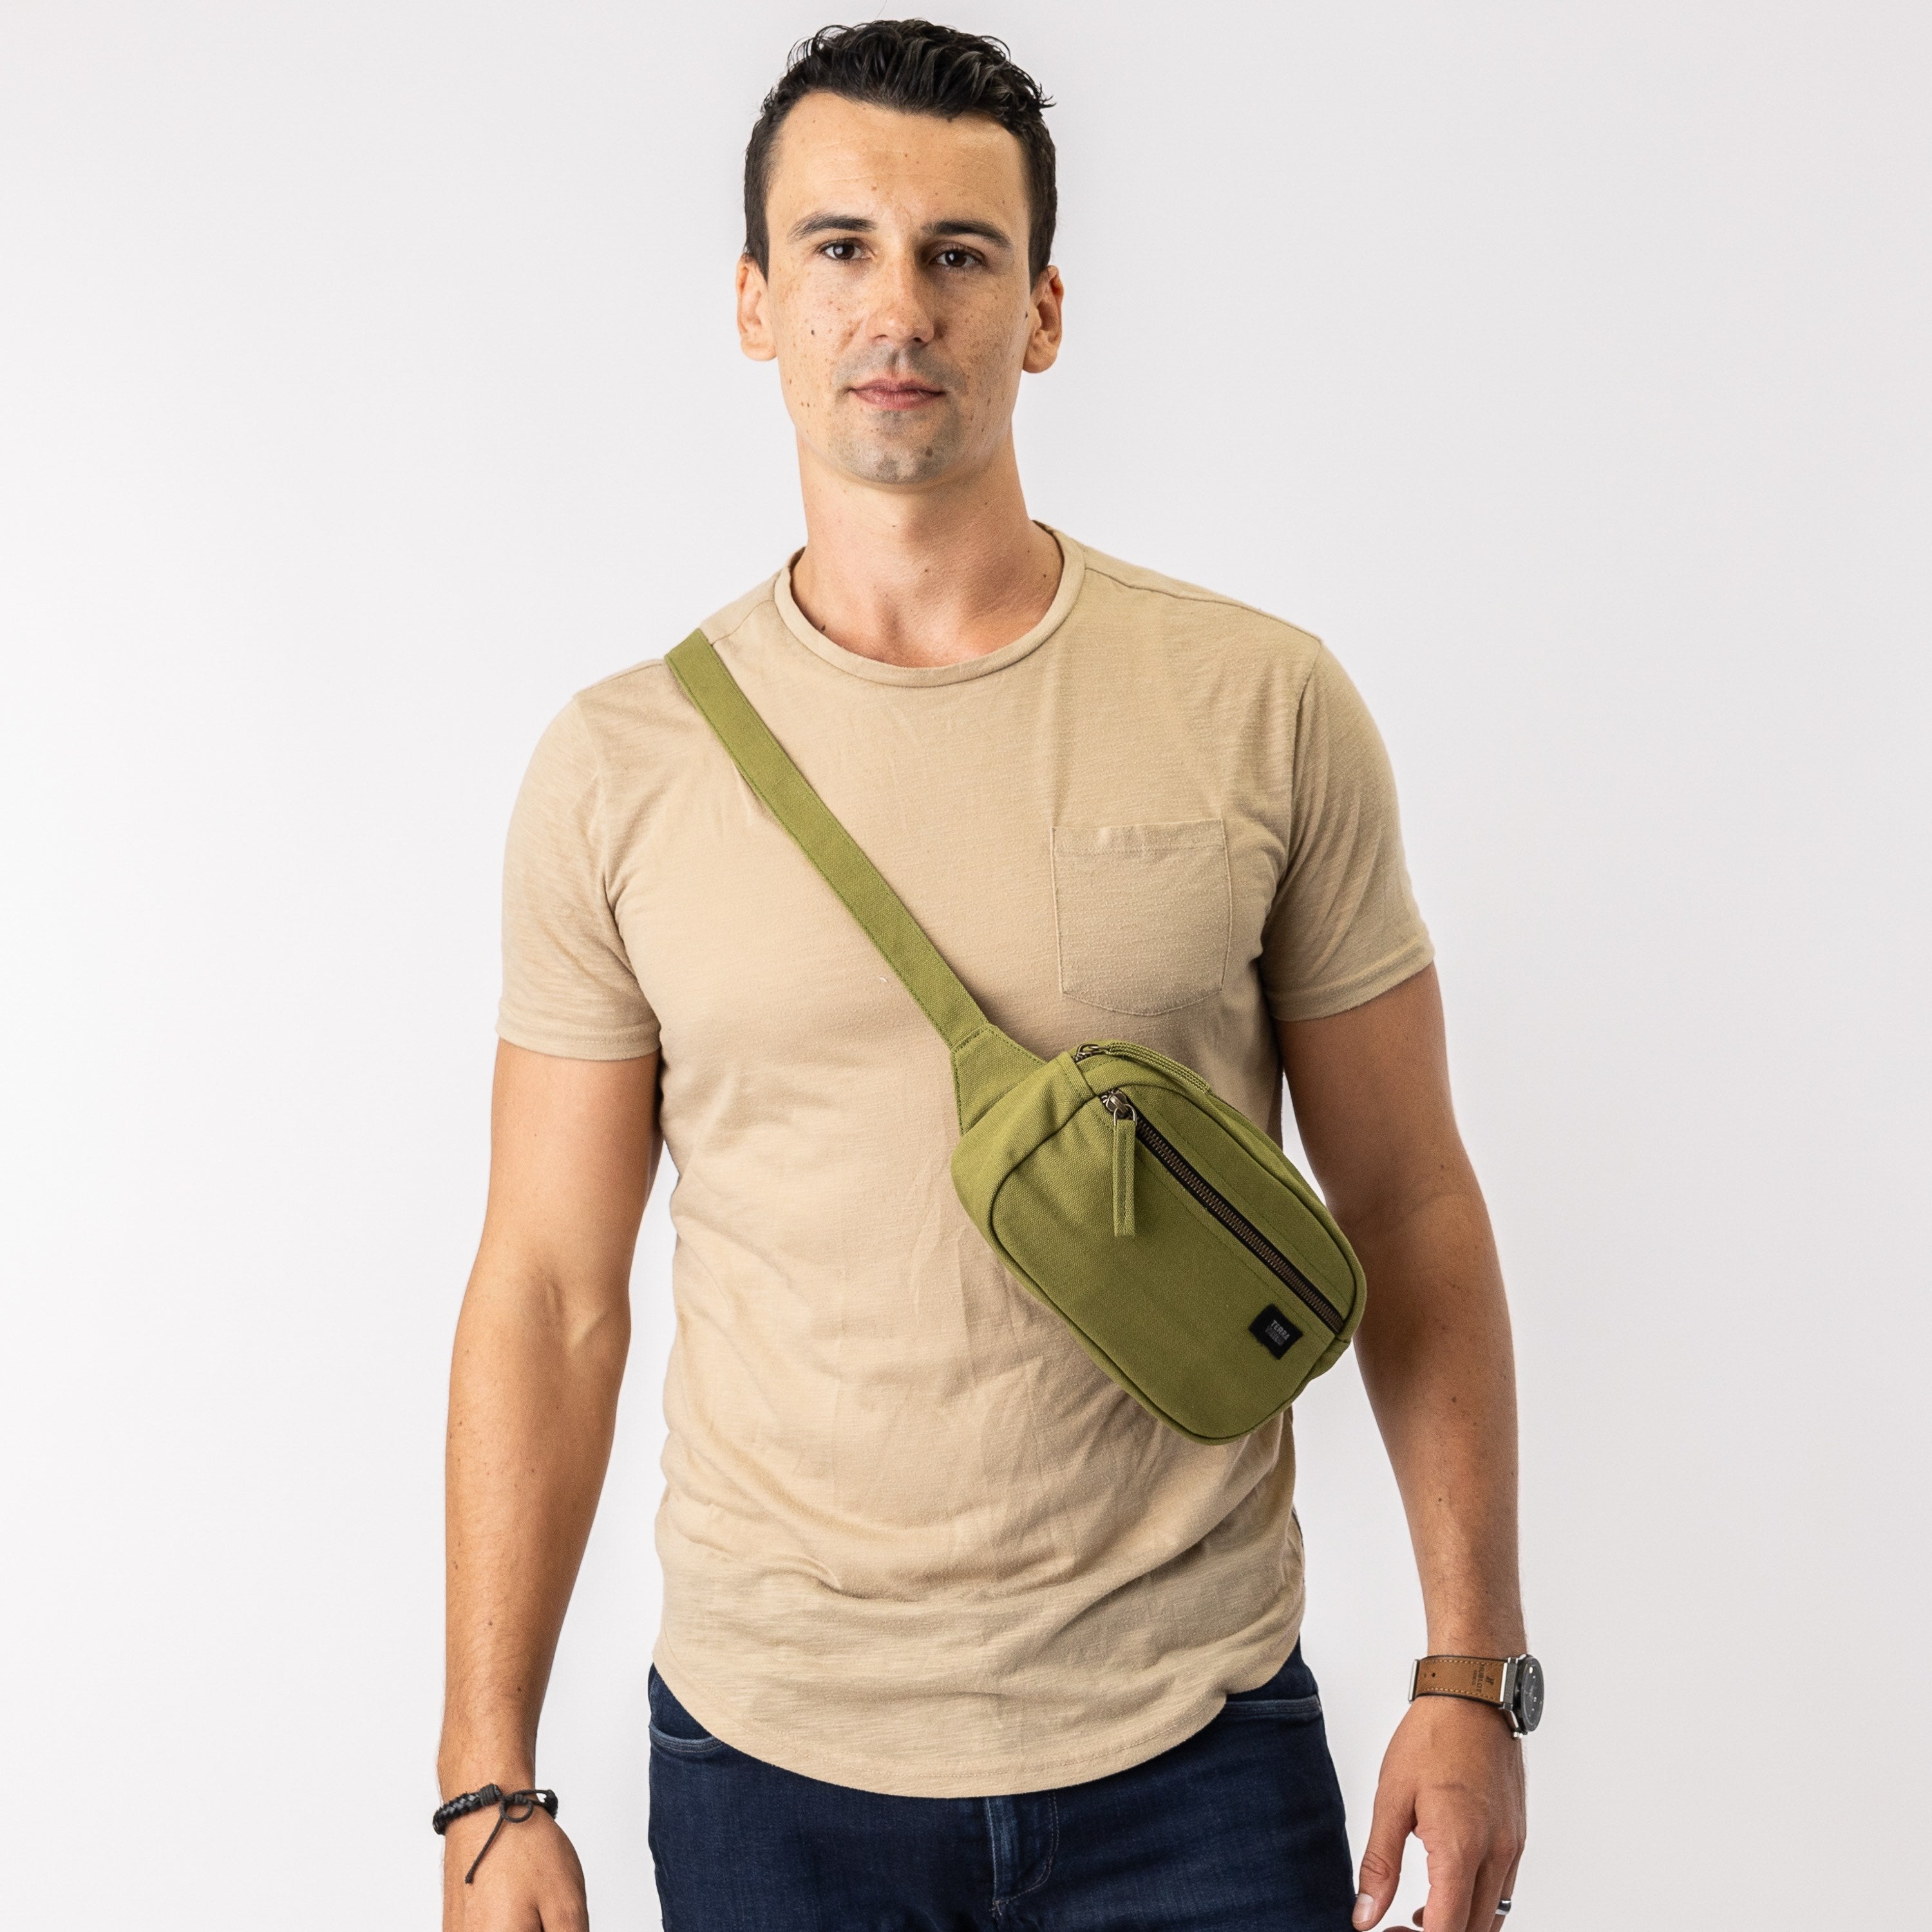 Buy GOCART WITH G LOGO Men's Nylon Outdoor Tactical Waist Bag EDC Molle Belt  Waist Pouch Security Purse Phone Carrying Case (Beige) at Amazon.in